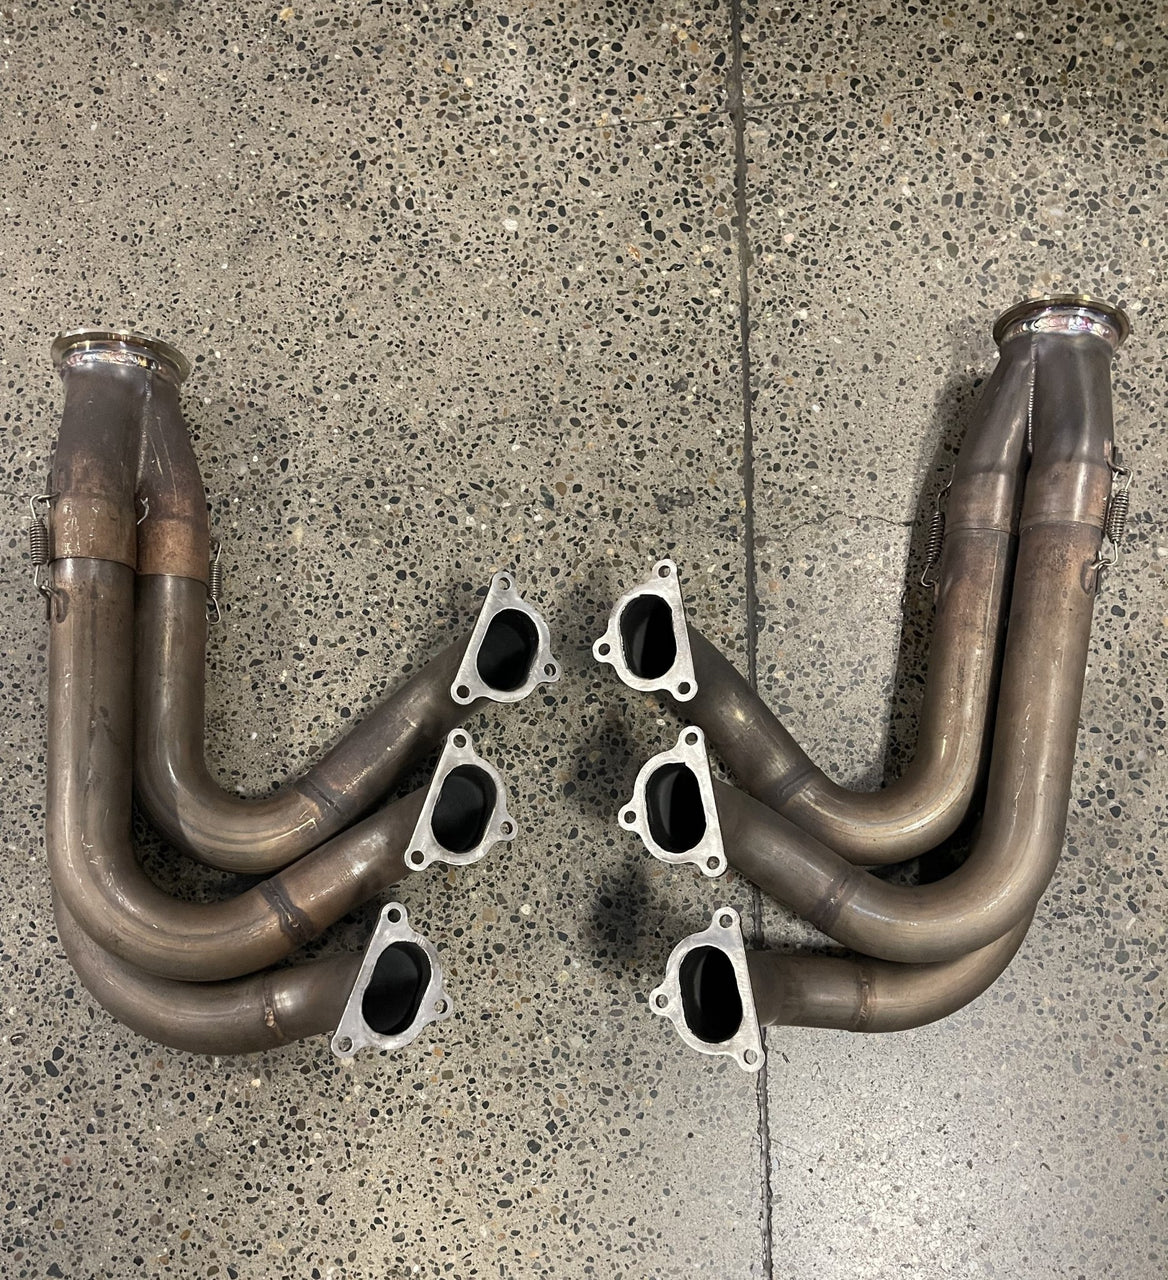 Pre-Owned 991.2 Cup Race Headers - Dundon Motorsports